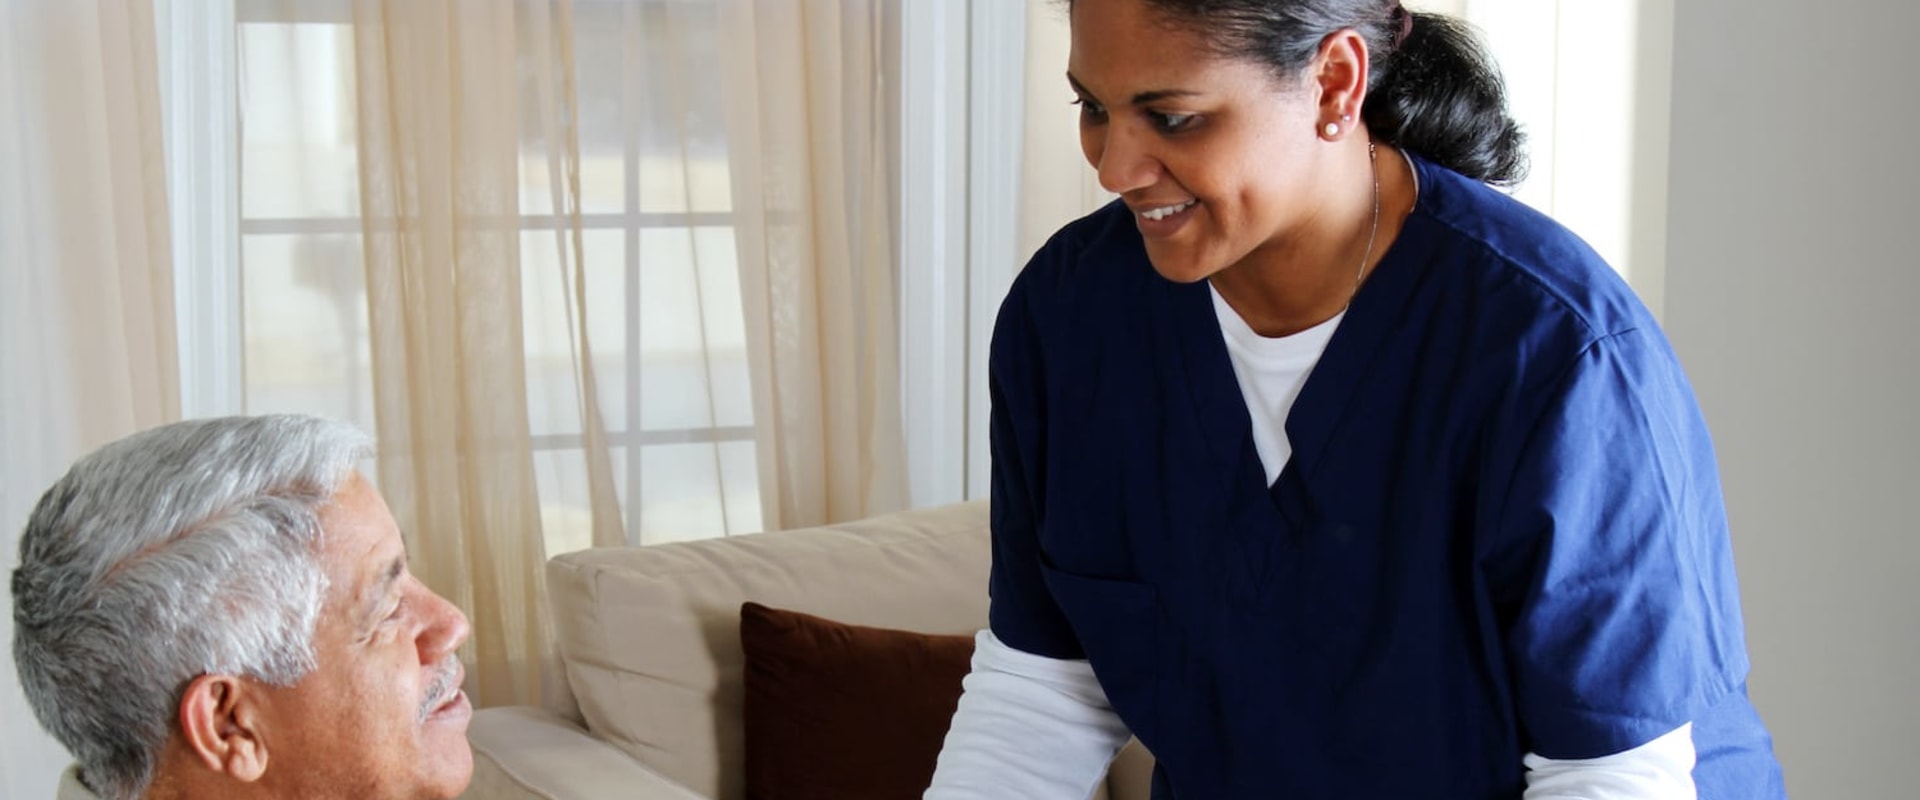 Average Costs of Home Care Services